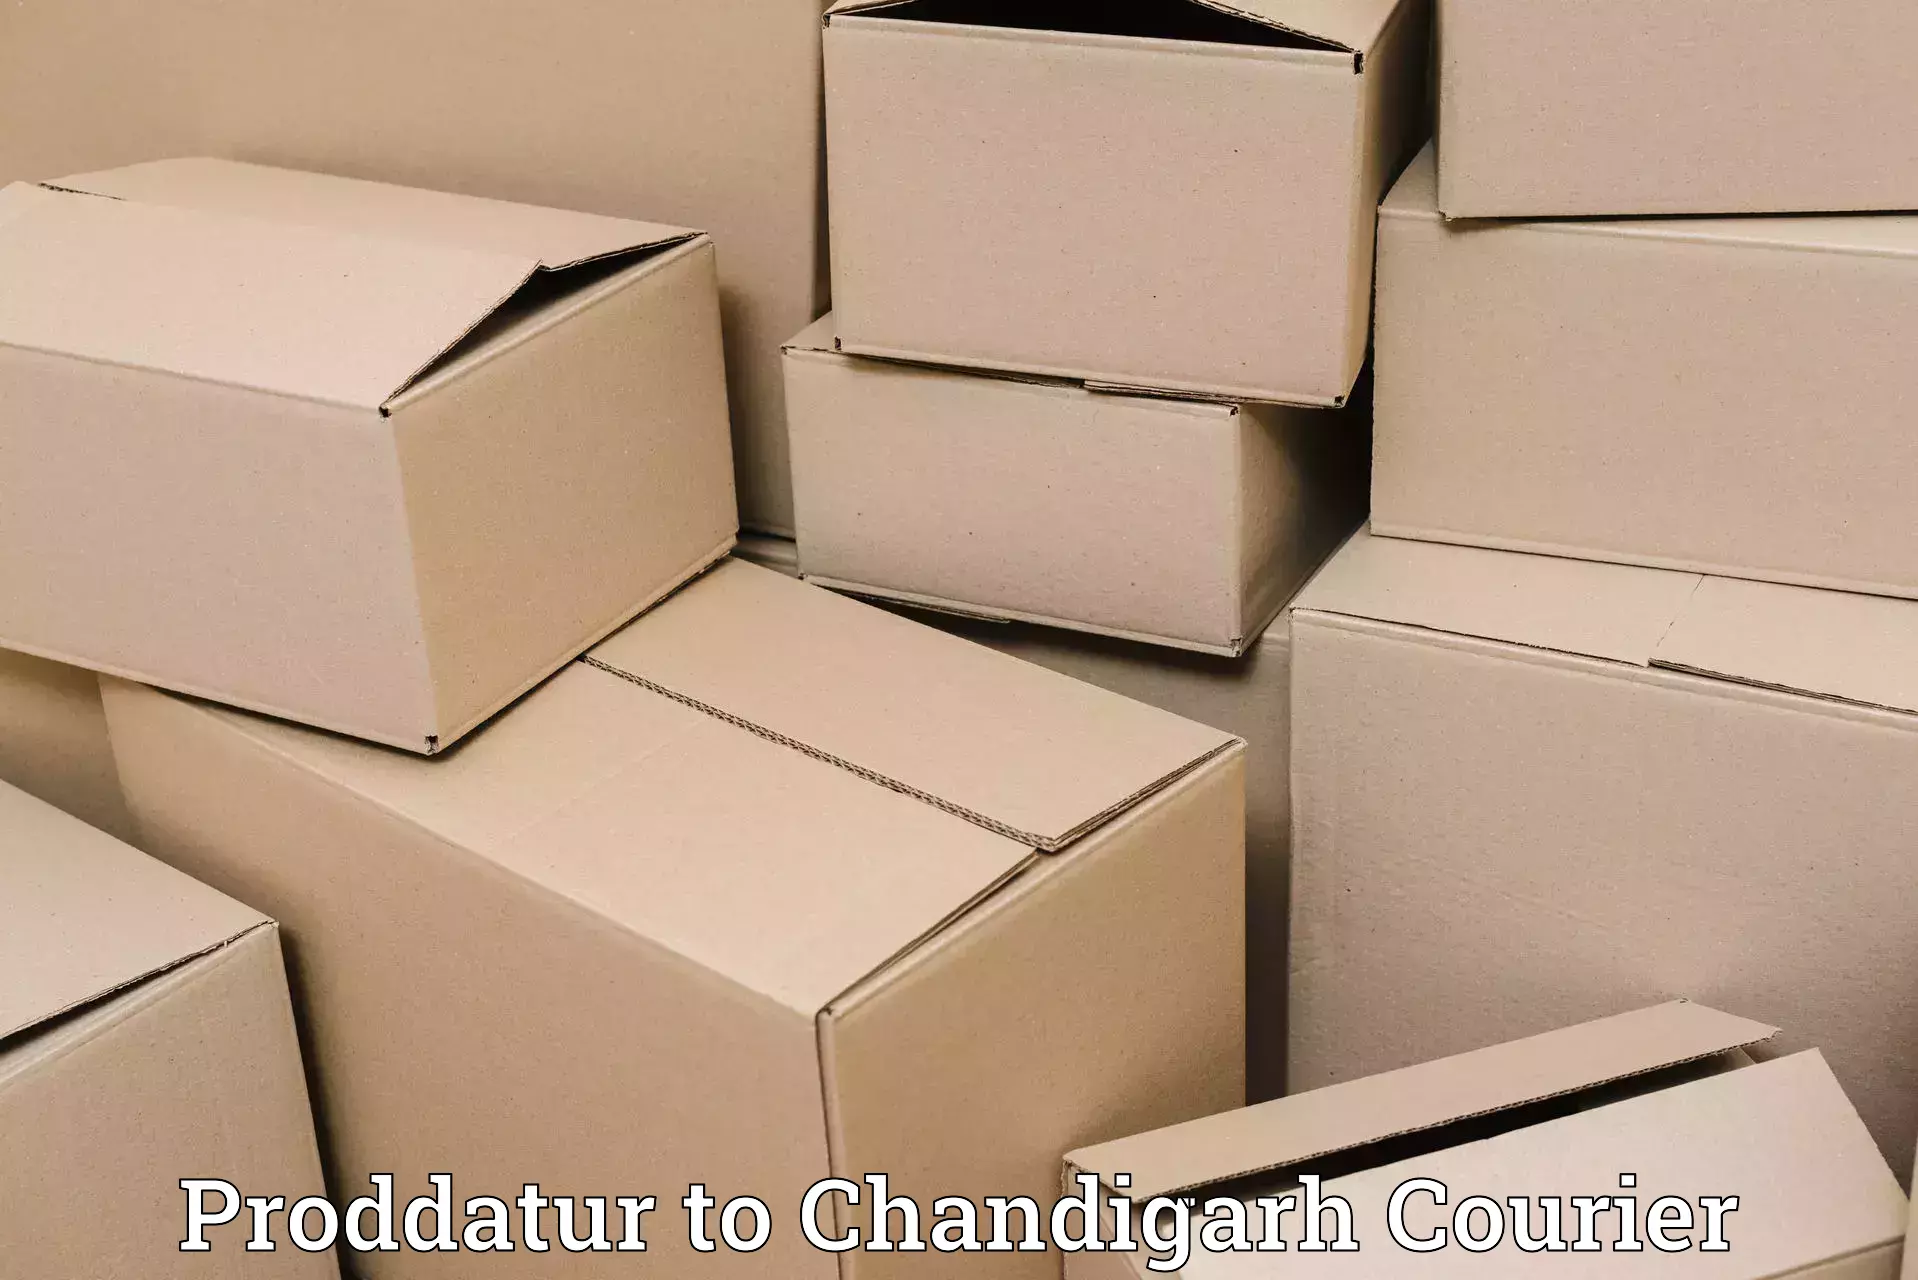 Personal effects shipping Proddatur to Chandigarh